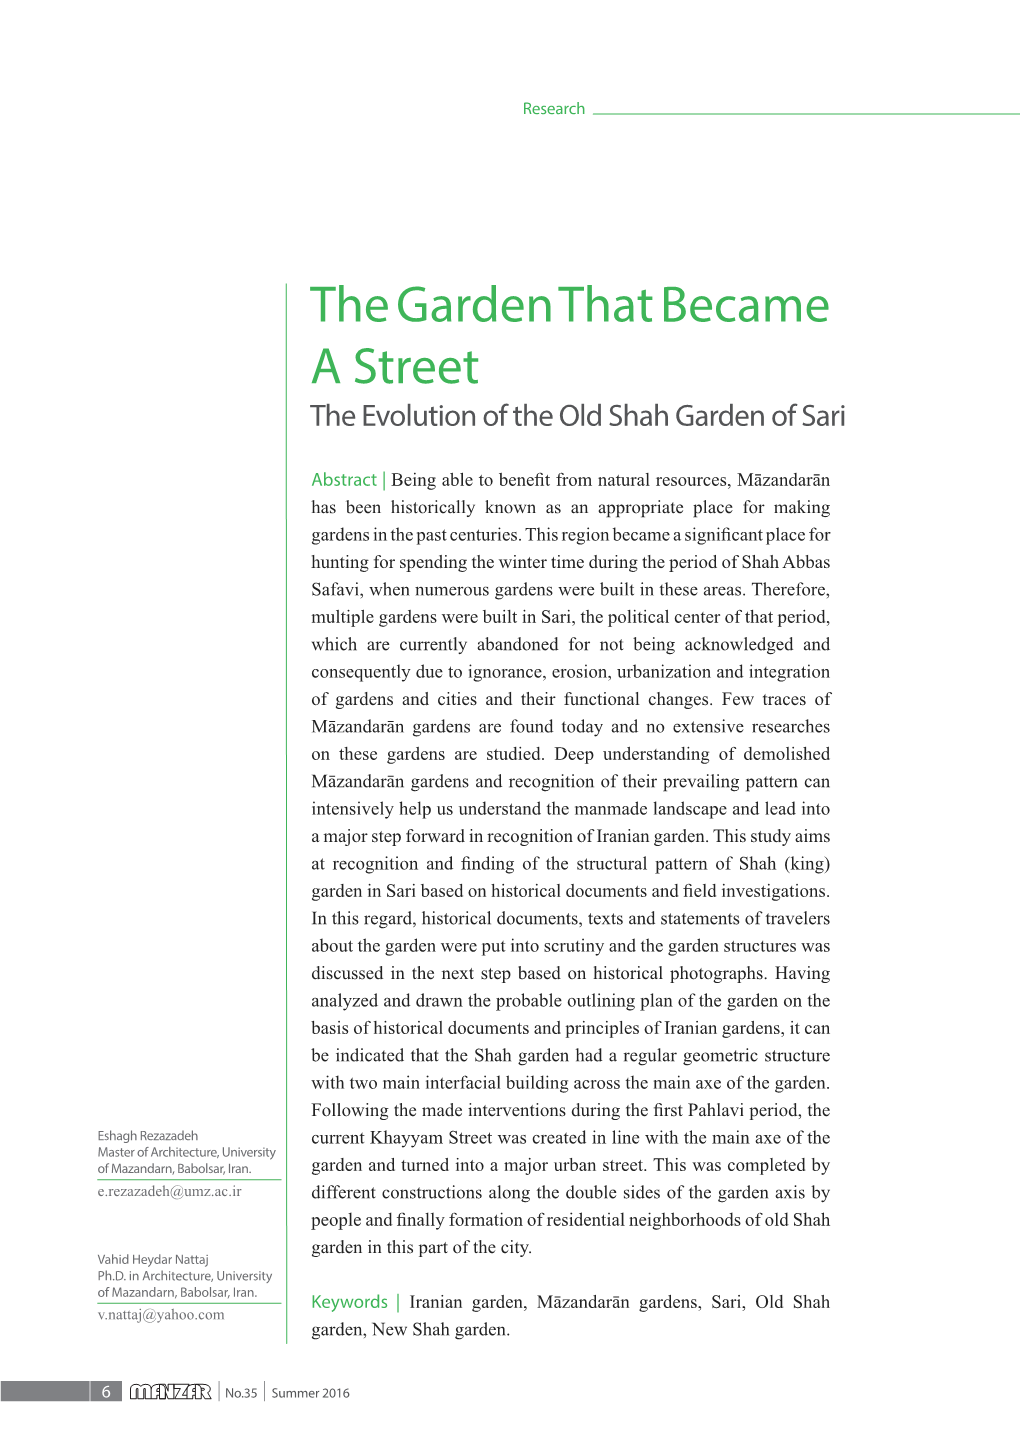 The Garden That Became a Street the Evolution of the Old Shah Garden of Sari